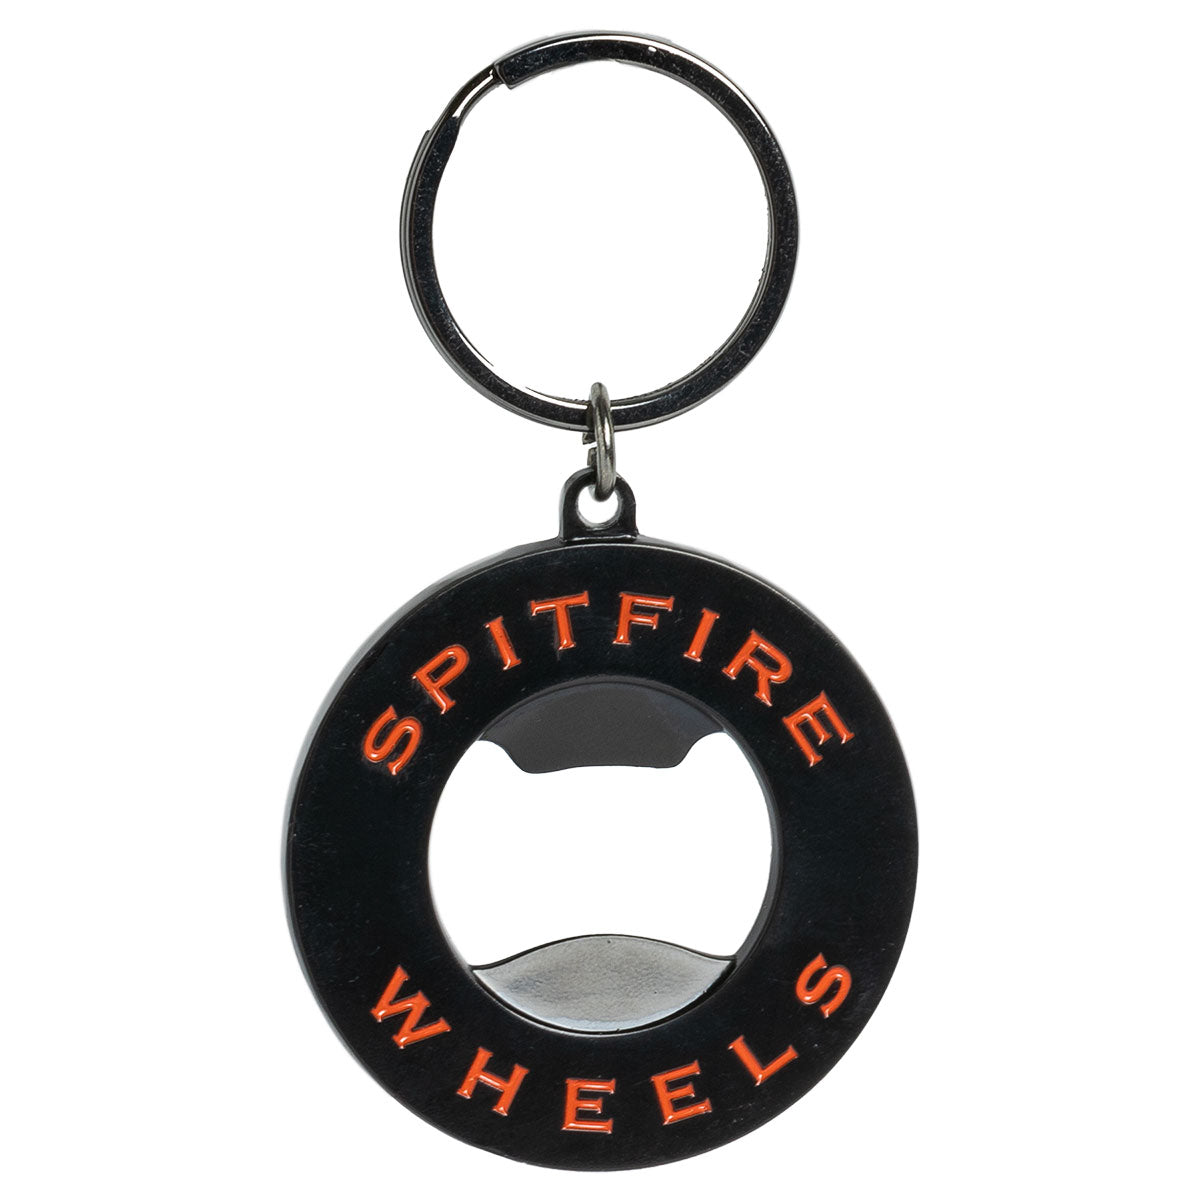 Spitfire Classic Swirl Keychains - Black/Red image 2